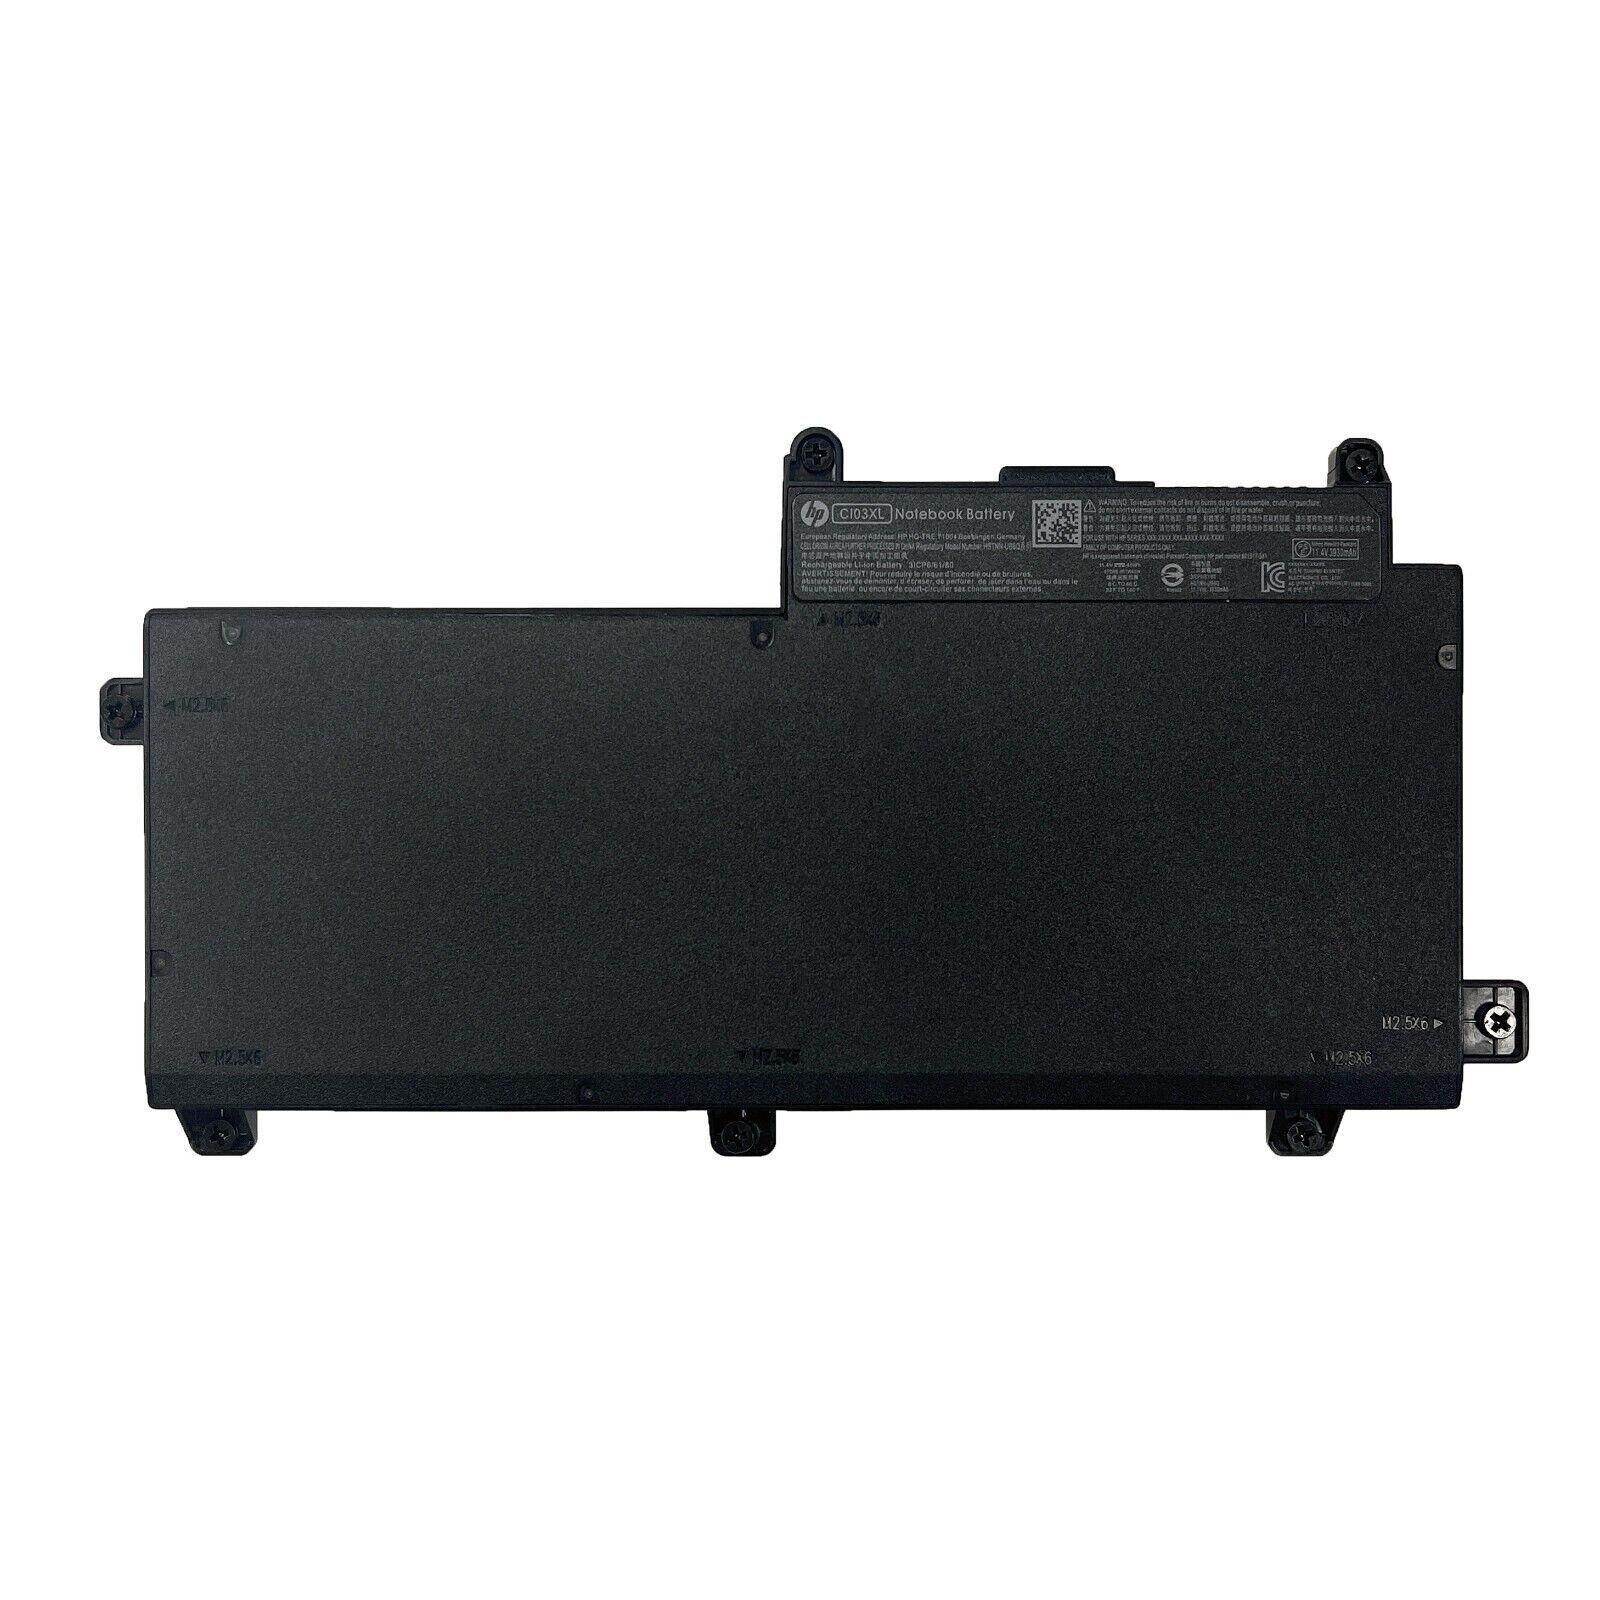 Genuine 48Wh CI03XL C103XL Battery For HP ProBook 640 645 650 655 G2 801554-001